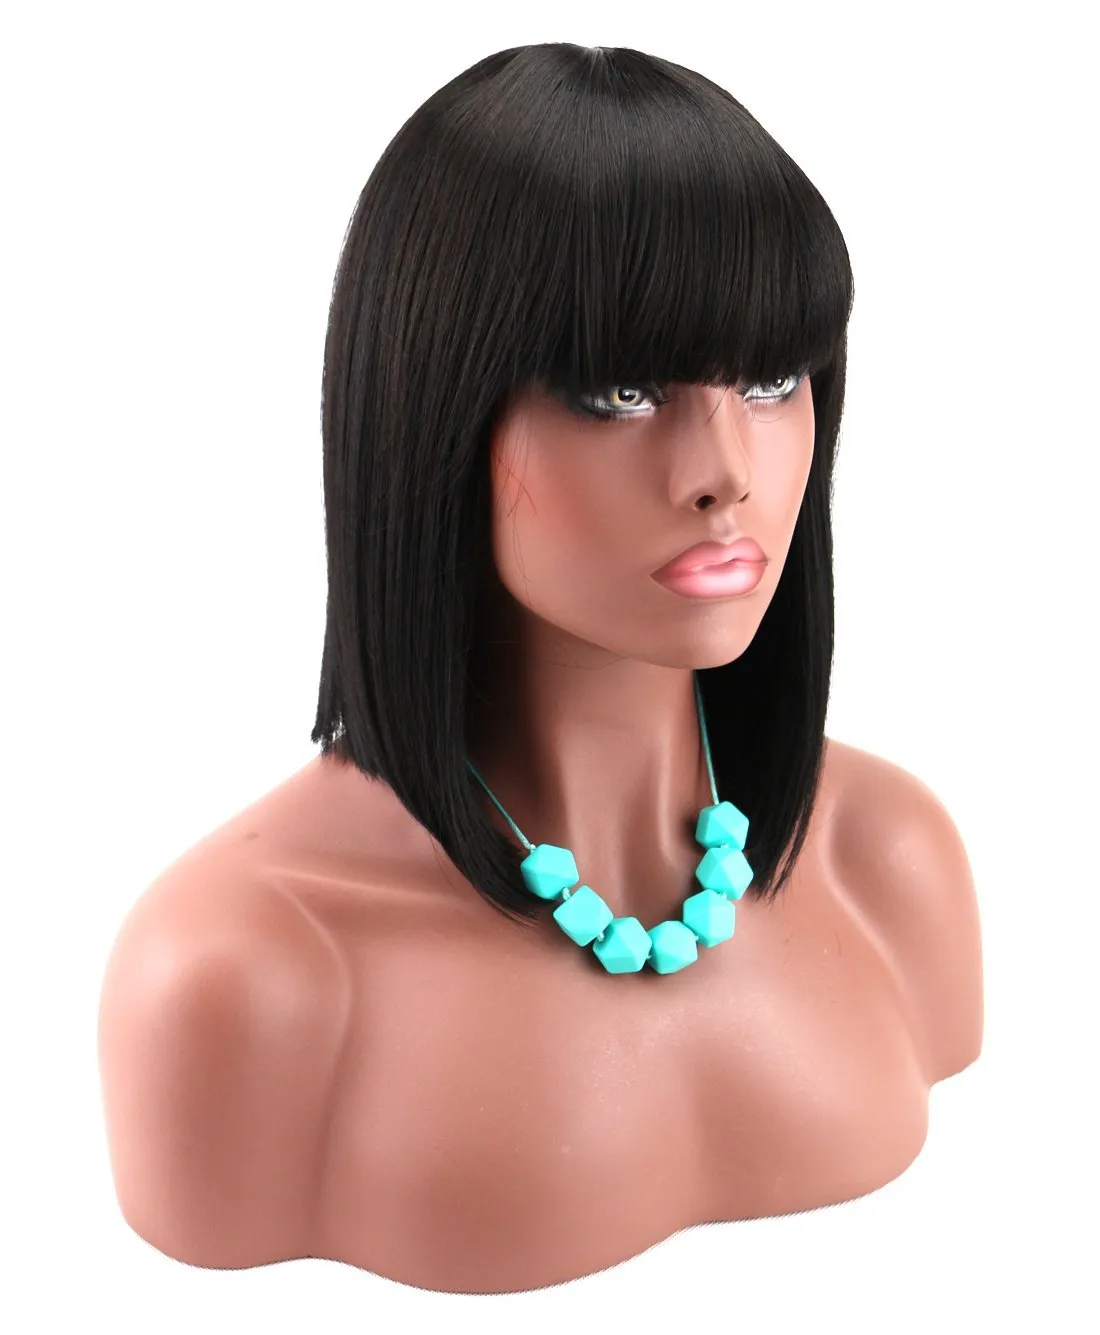 Short Bob Lace Wigs With Bangs Brazilian Virgin Hair Straight Lace Front Human Hair Wigs For Black Women Swiss Lace Frontal Wigs Gali Hair